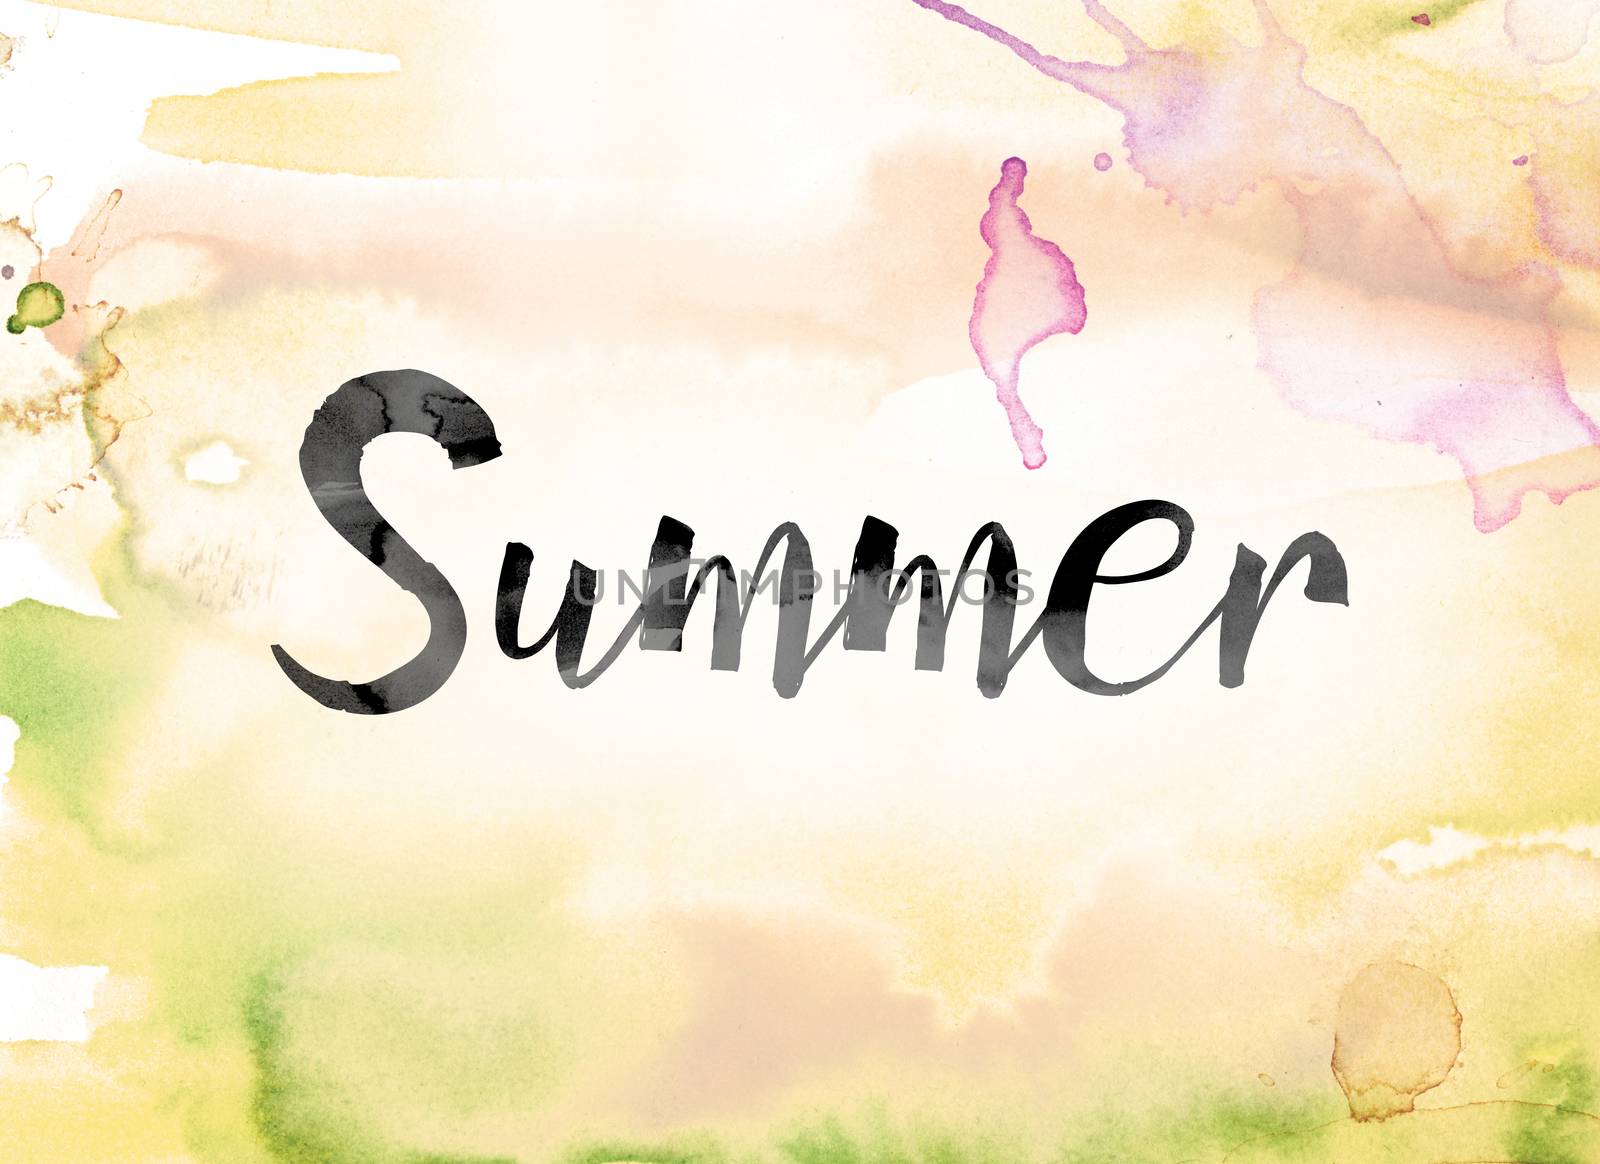 The word "Summer" painted in black ink over a colorful watercolor washed background concept and theme.